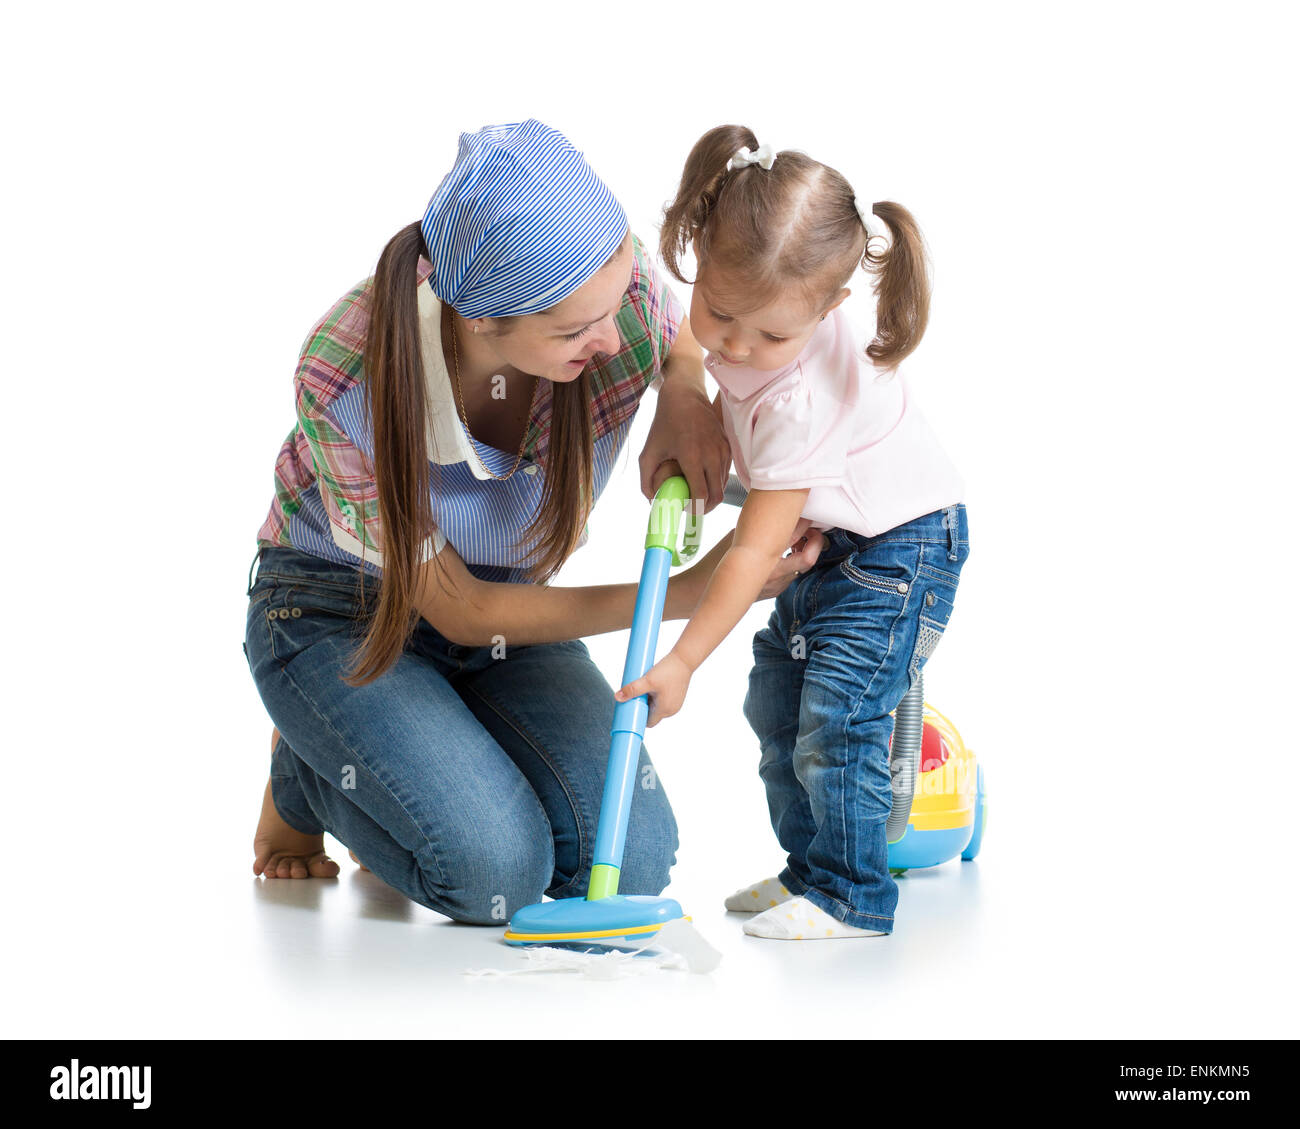 Little girl and woman with vacuum cleaner isolated Stock Photo